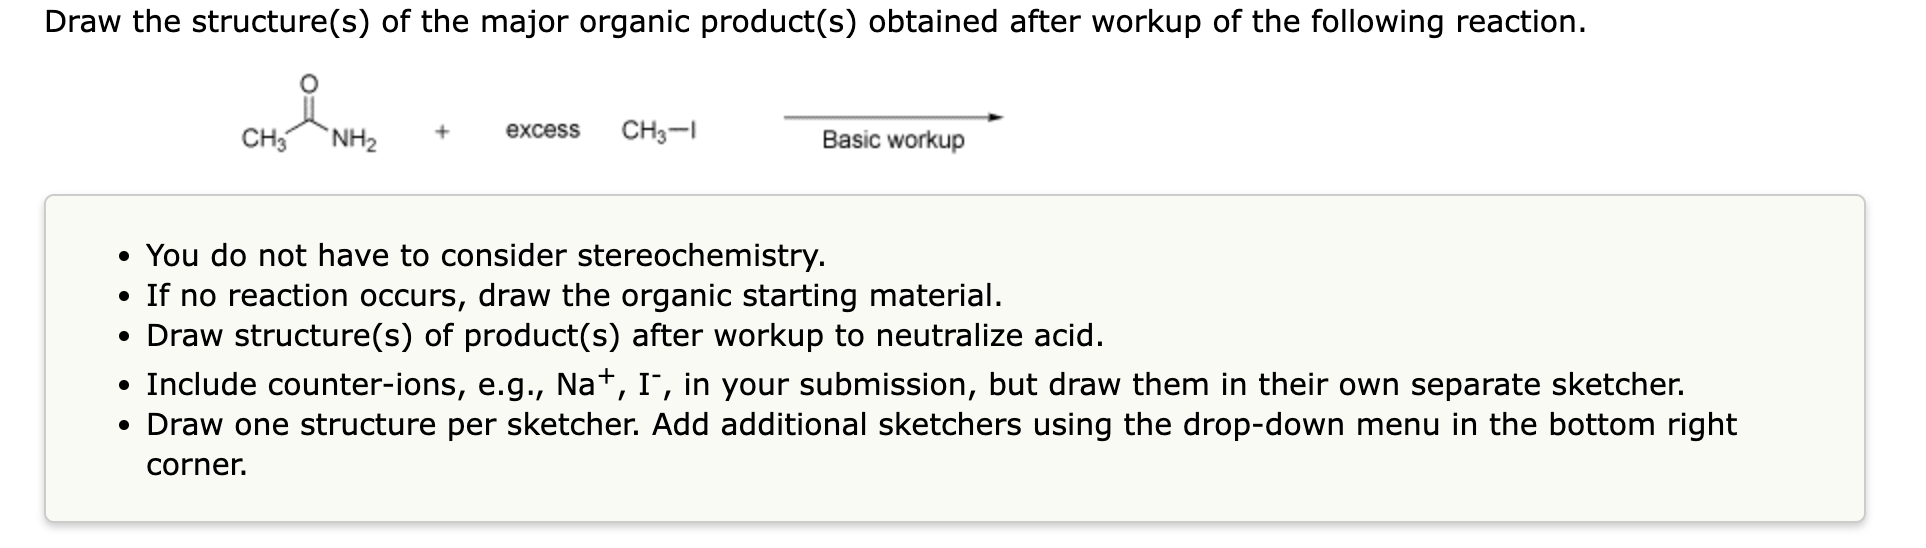 Solved Draw the structure(s) of the major organic product(s) | Chegg.com